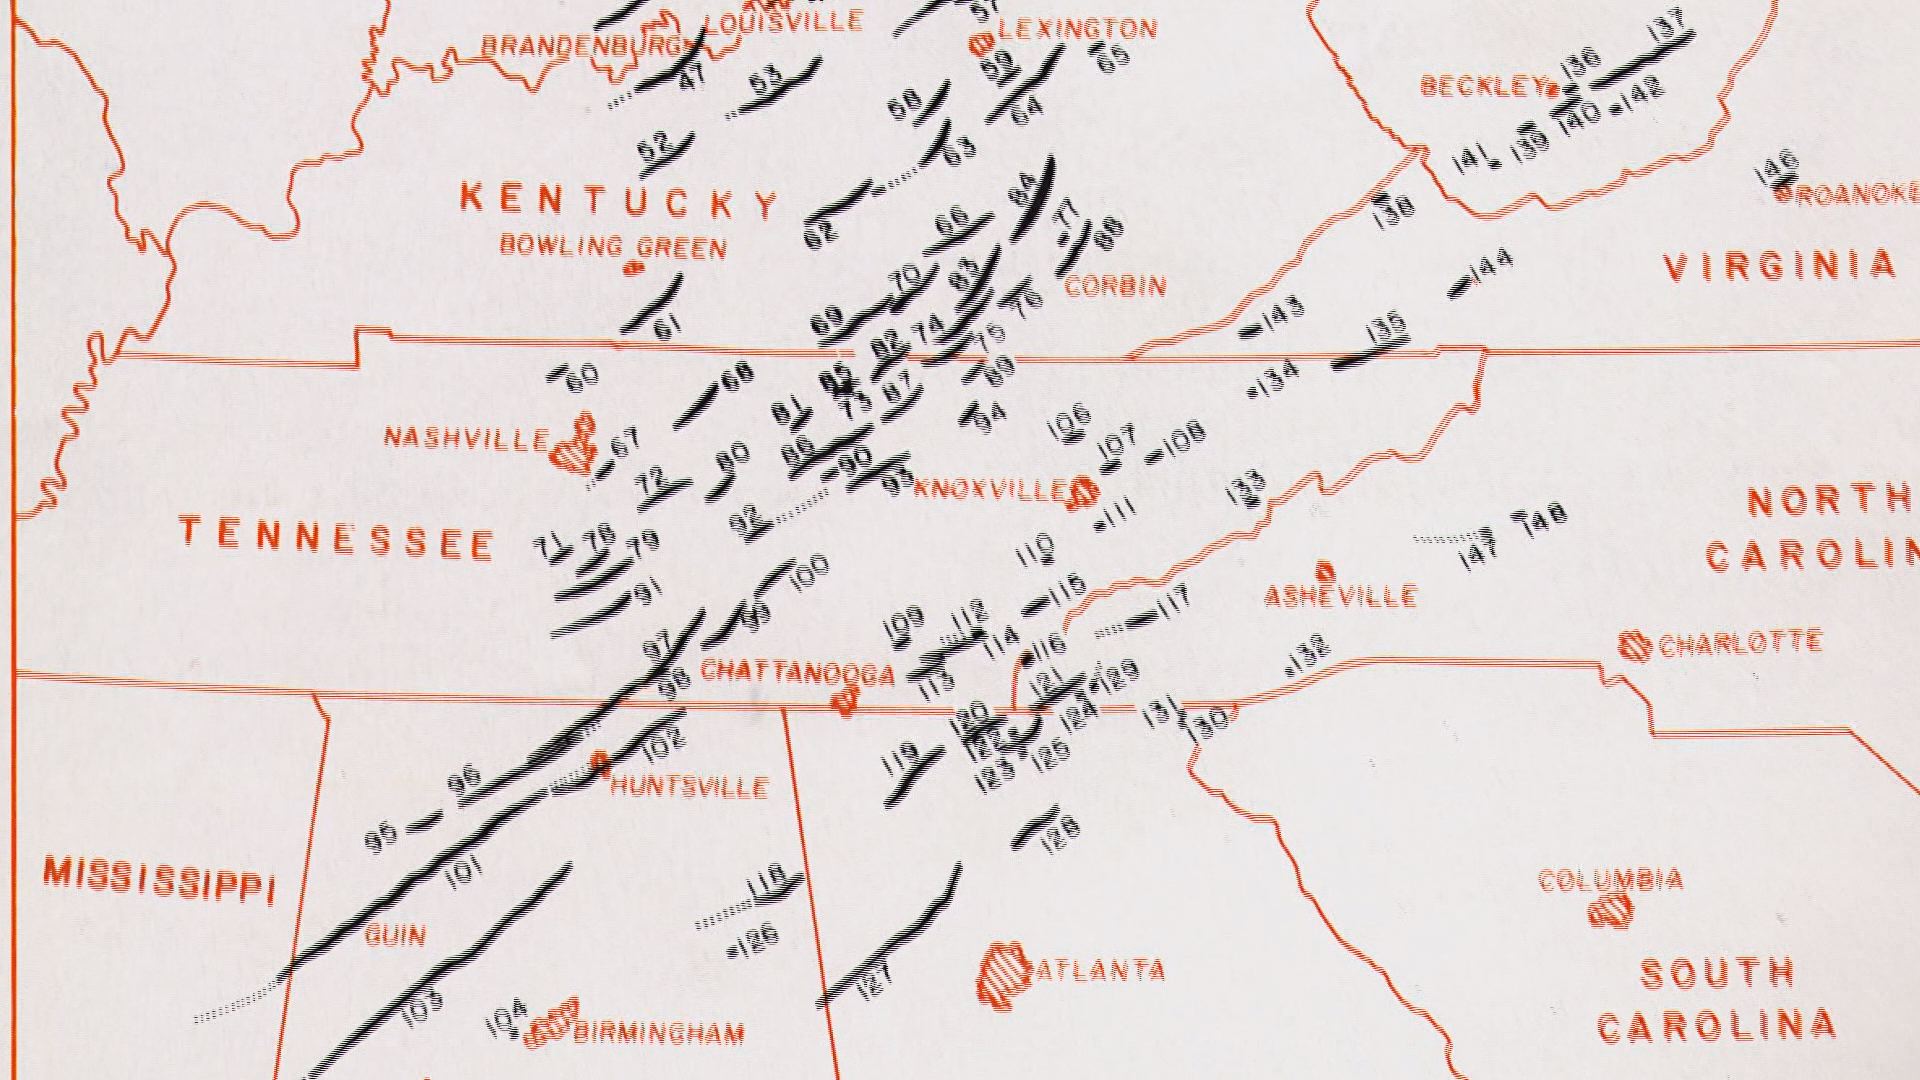 45 years ago 1974 tornado "super outbreak" ravages East Tennessee